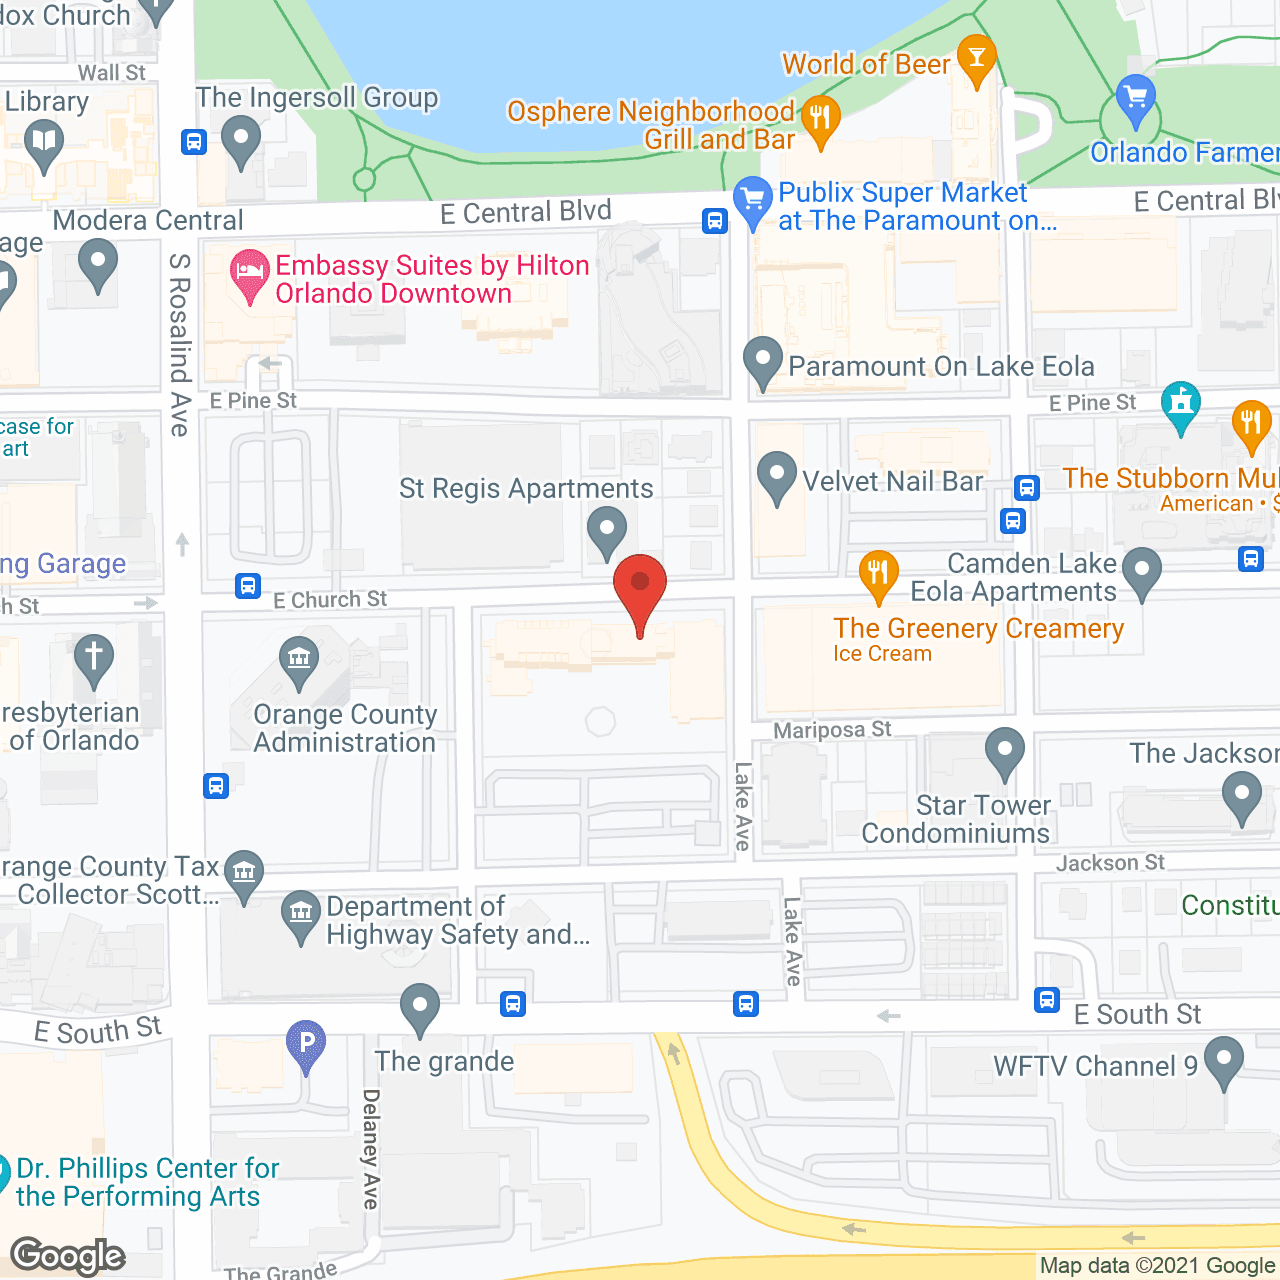 Orlando Lutheran Towers in google map